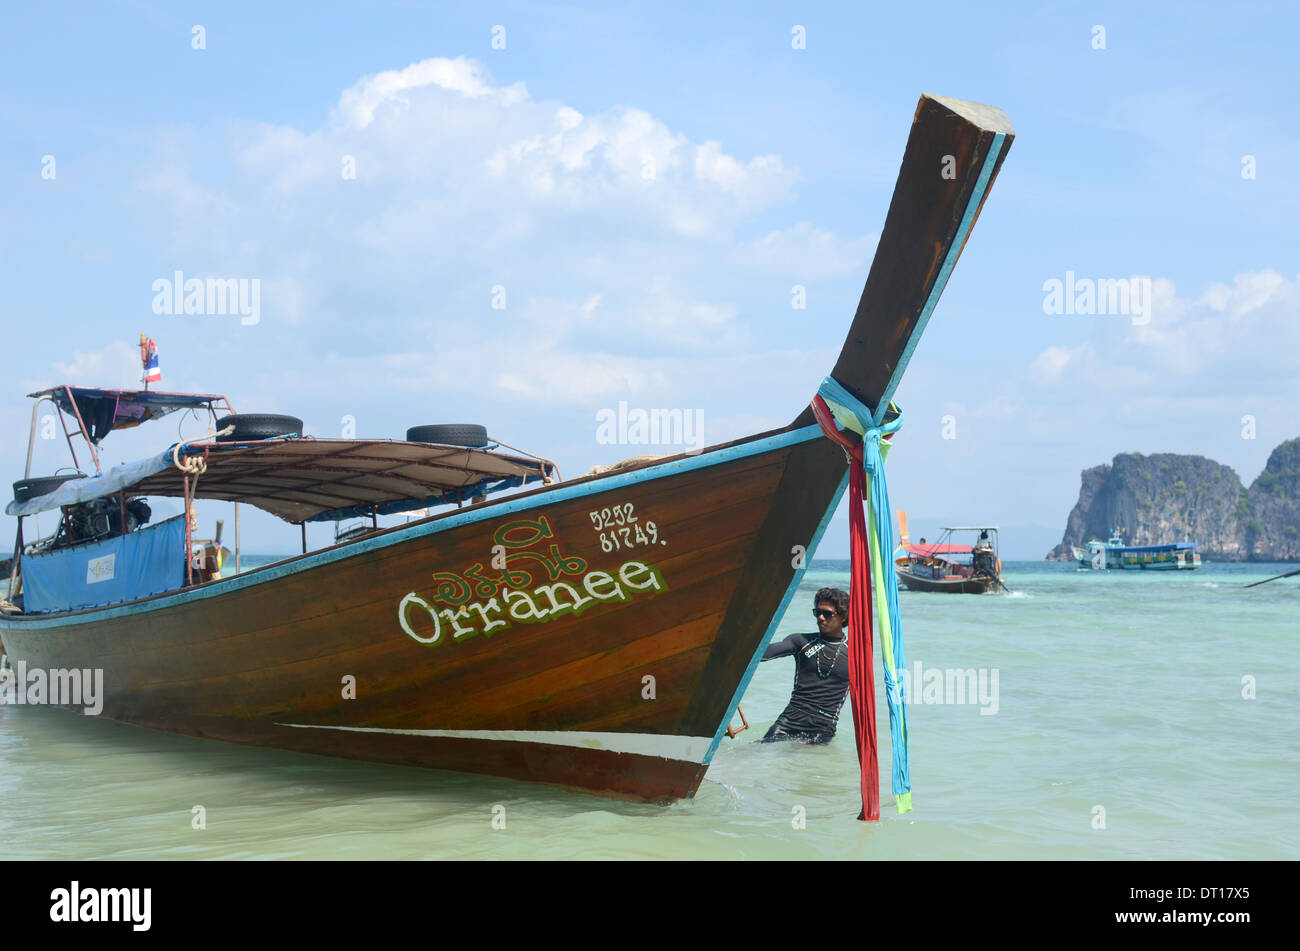 Tour guide with longtail boat in sea, Koh Ngai, Koh Lanta, Thailand Stock Photo